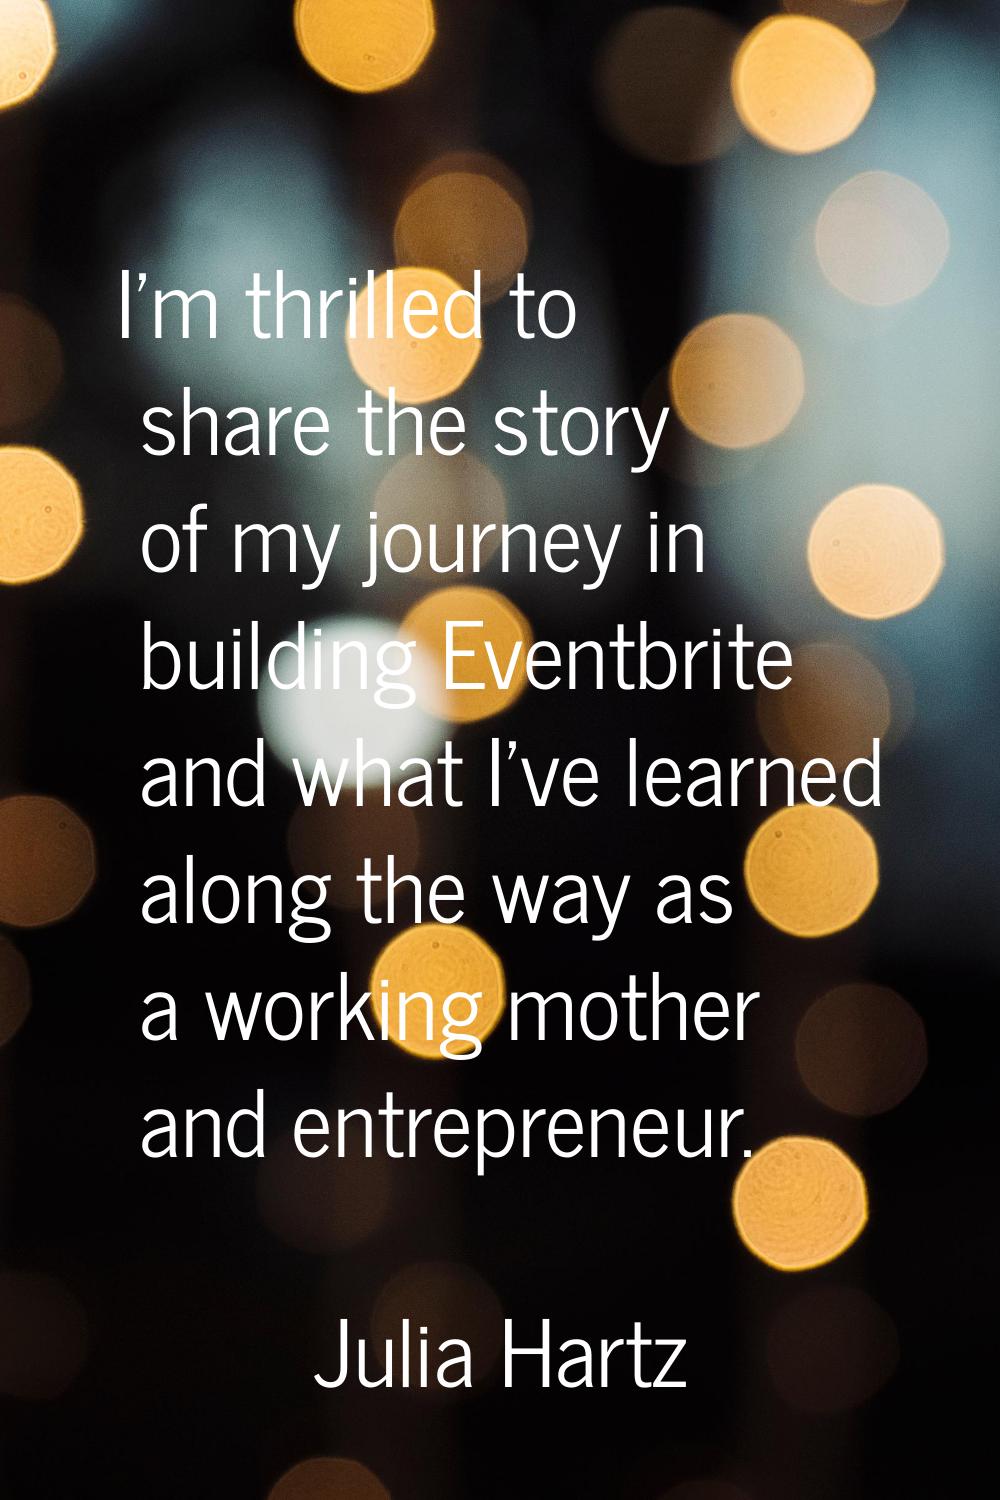 I'm thrilled to share the story of my journey in building Eventbrite and what I've learned along th